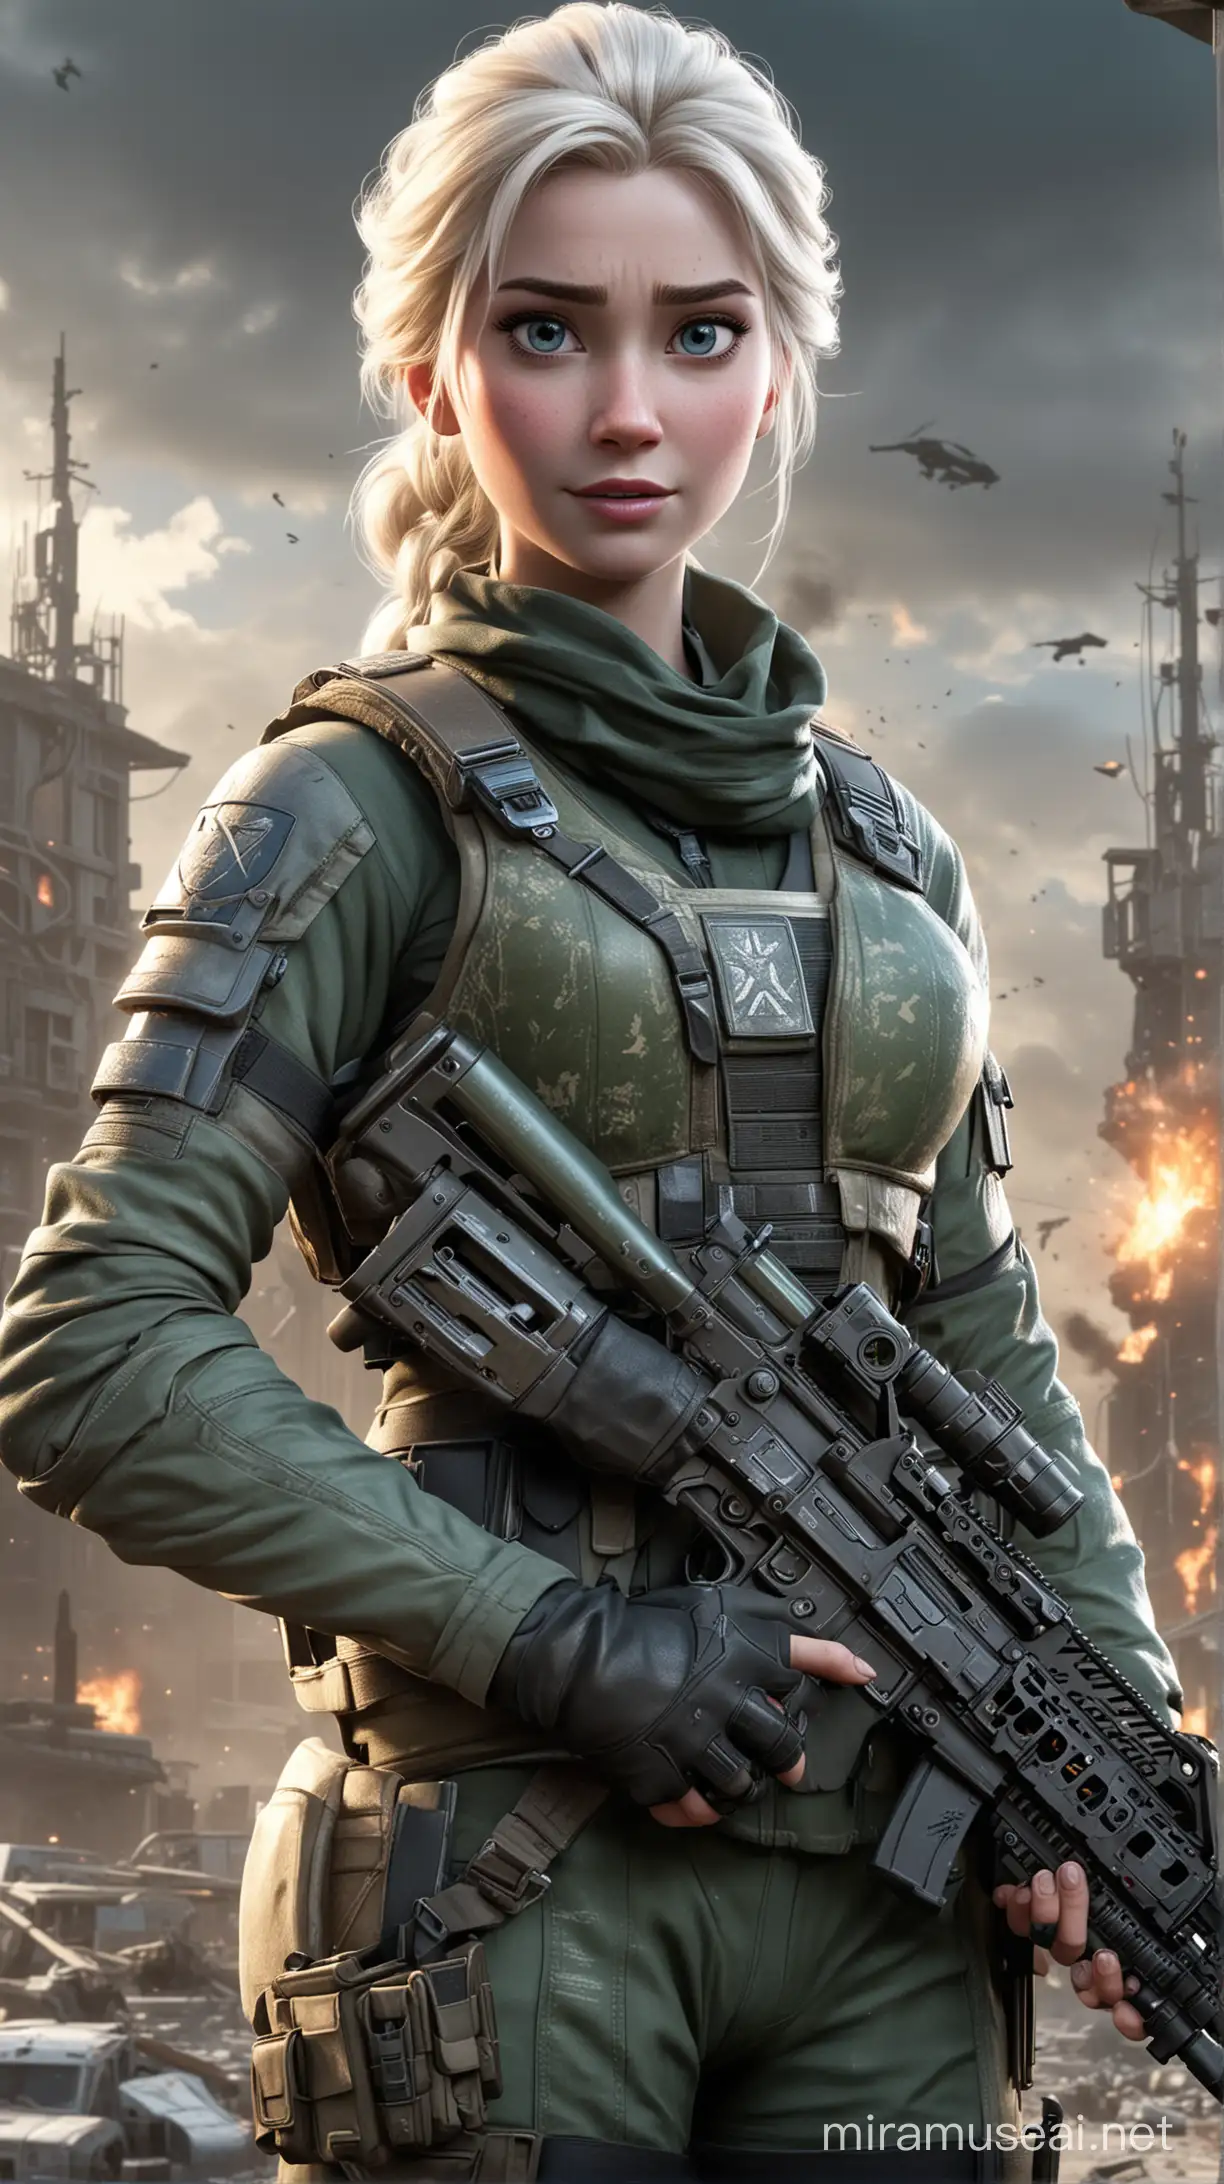 Elsa from Frozen as an operator from the Game Call of duty, wearing futuristic military armor vest and holding Assault Rifle. with a warzone in the background  